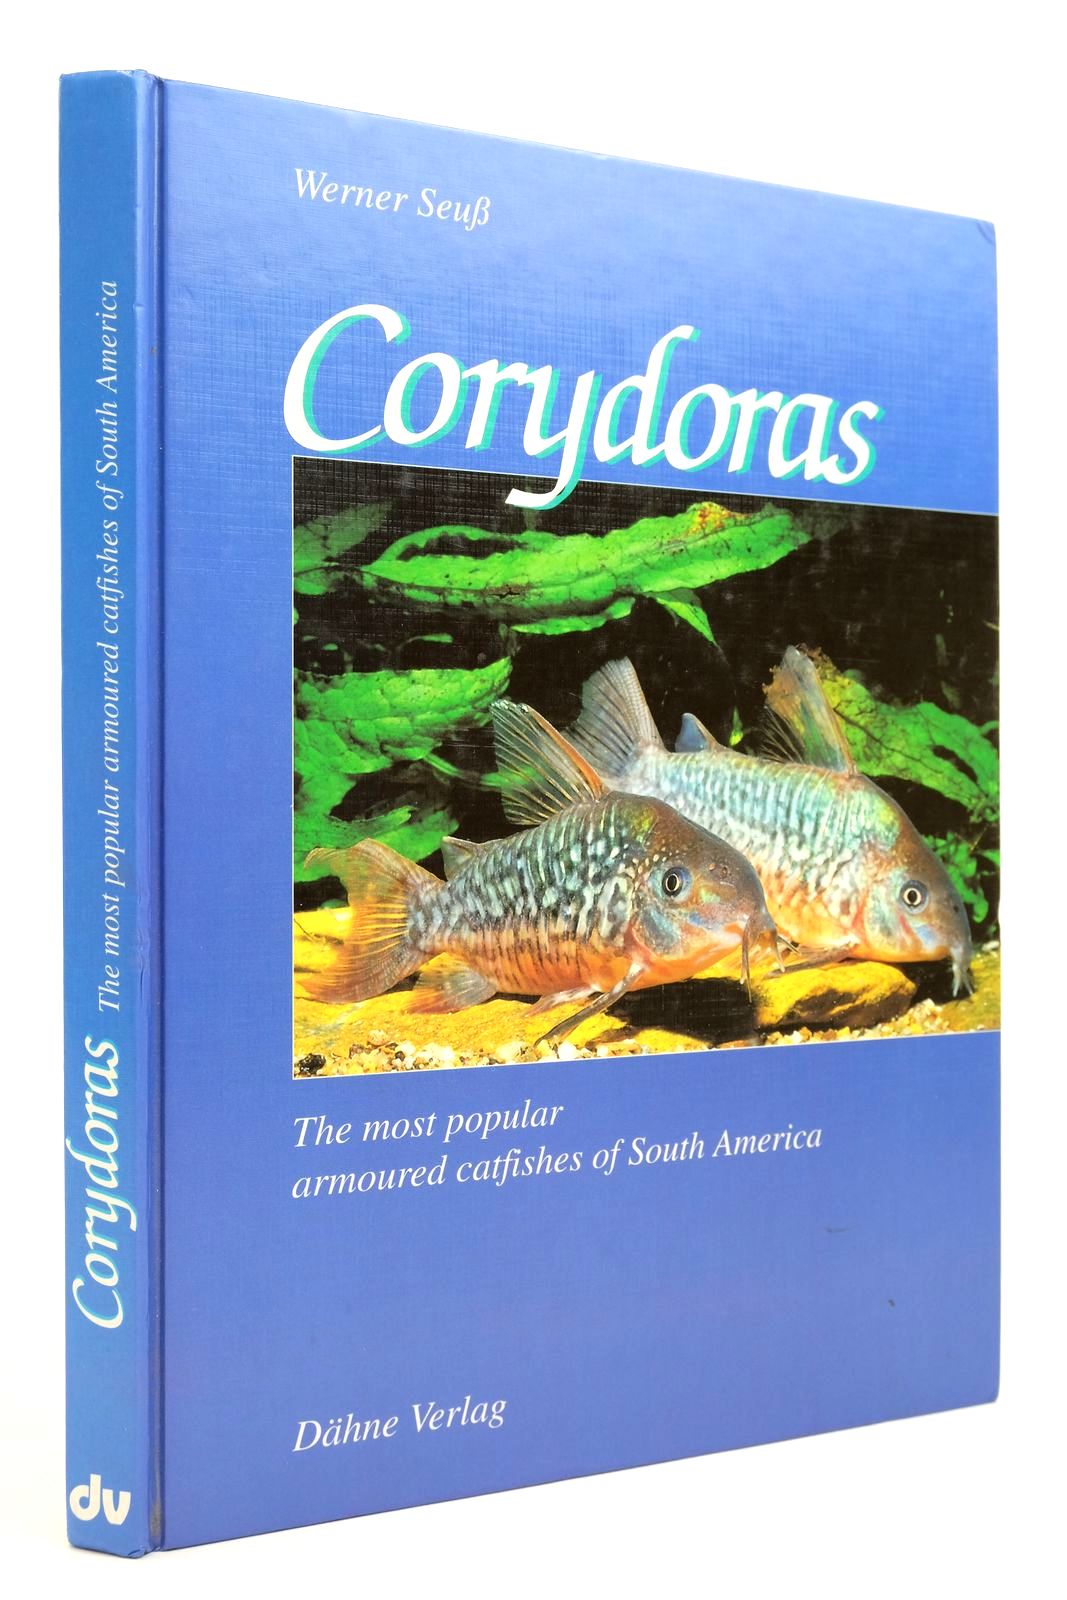 Photo of CORYDORAS: THE MOST POPULAR ARMOURED CATFISHES OF SOUTH AMERICA written by Seub, Werner published by Dahne Verlag (STOCK CODE: 2139528)  for sale by Stella & Rose's Books